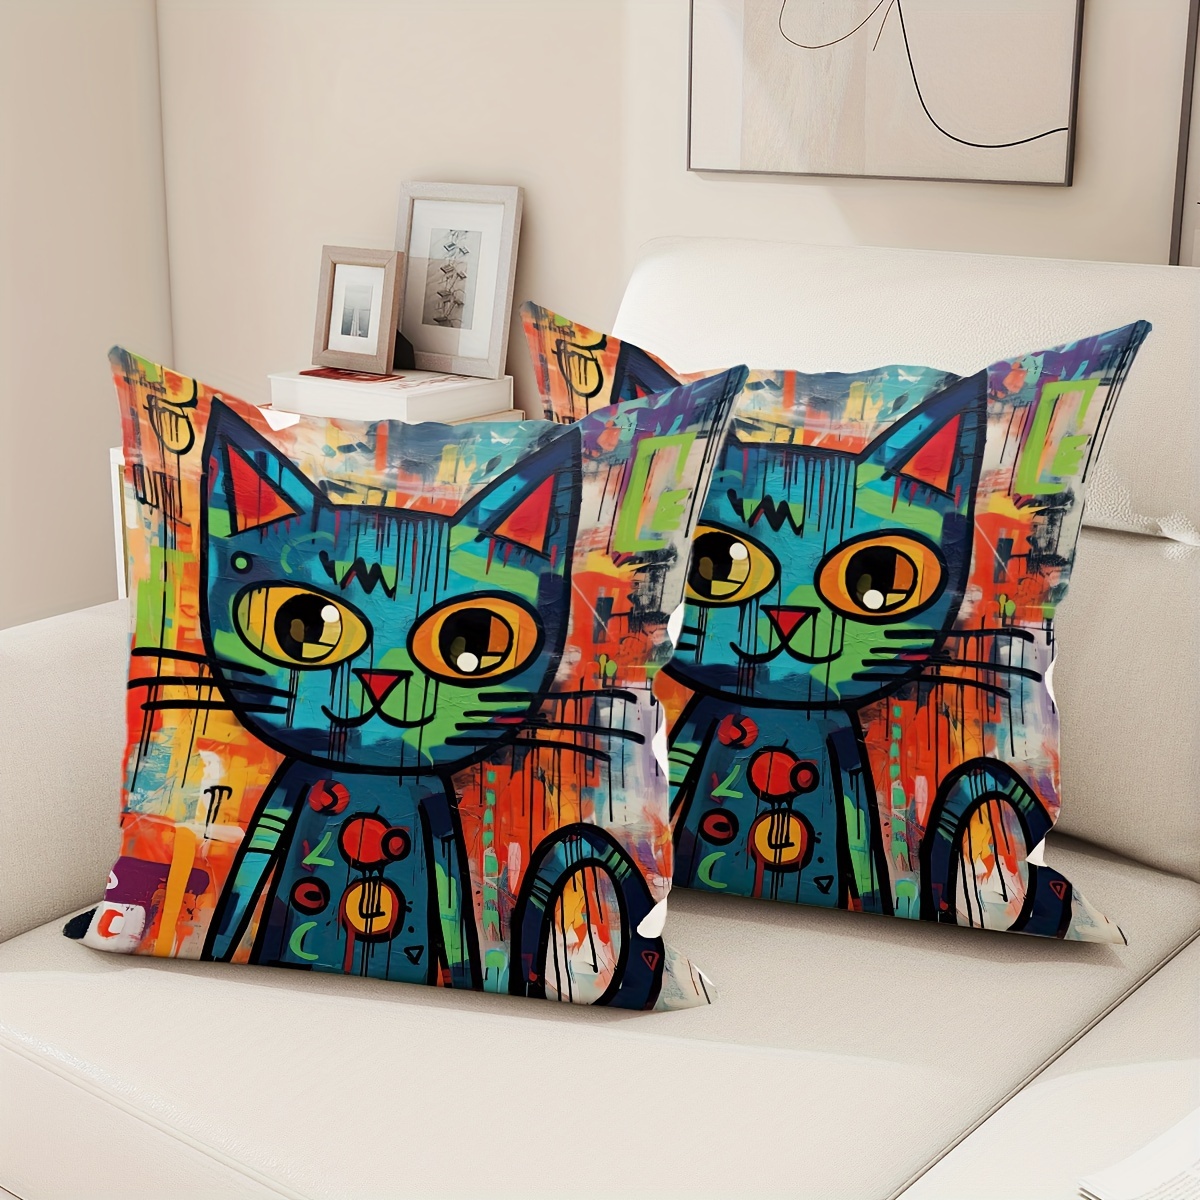 

2pcs Velvet Throw Pillow Covers Cartoon Funny Abstract Cat Animal Blue Cyan Orange Pillow Covers 18*18 Inch Suitable For Living Room Bedroom Sofa Bed Decoration